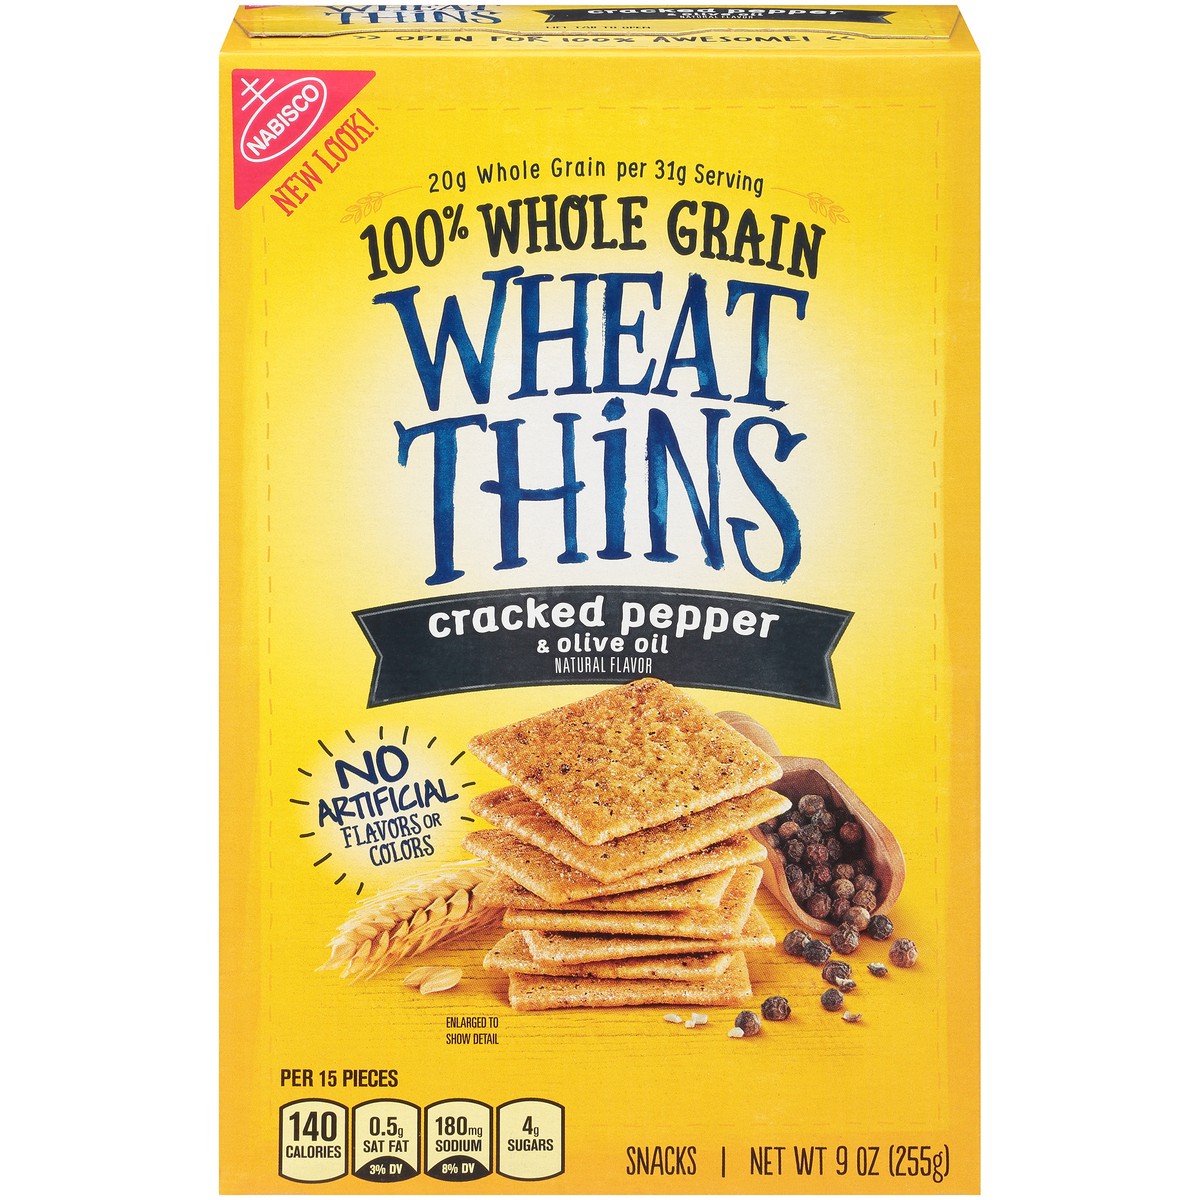 slide 1 of 14, Wheat Thins Cracked Pepper & Olive Oil Whole Grain Wheat Crackers, 9 oz, 0.56 lb